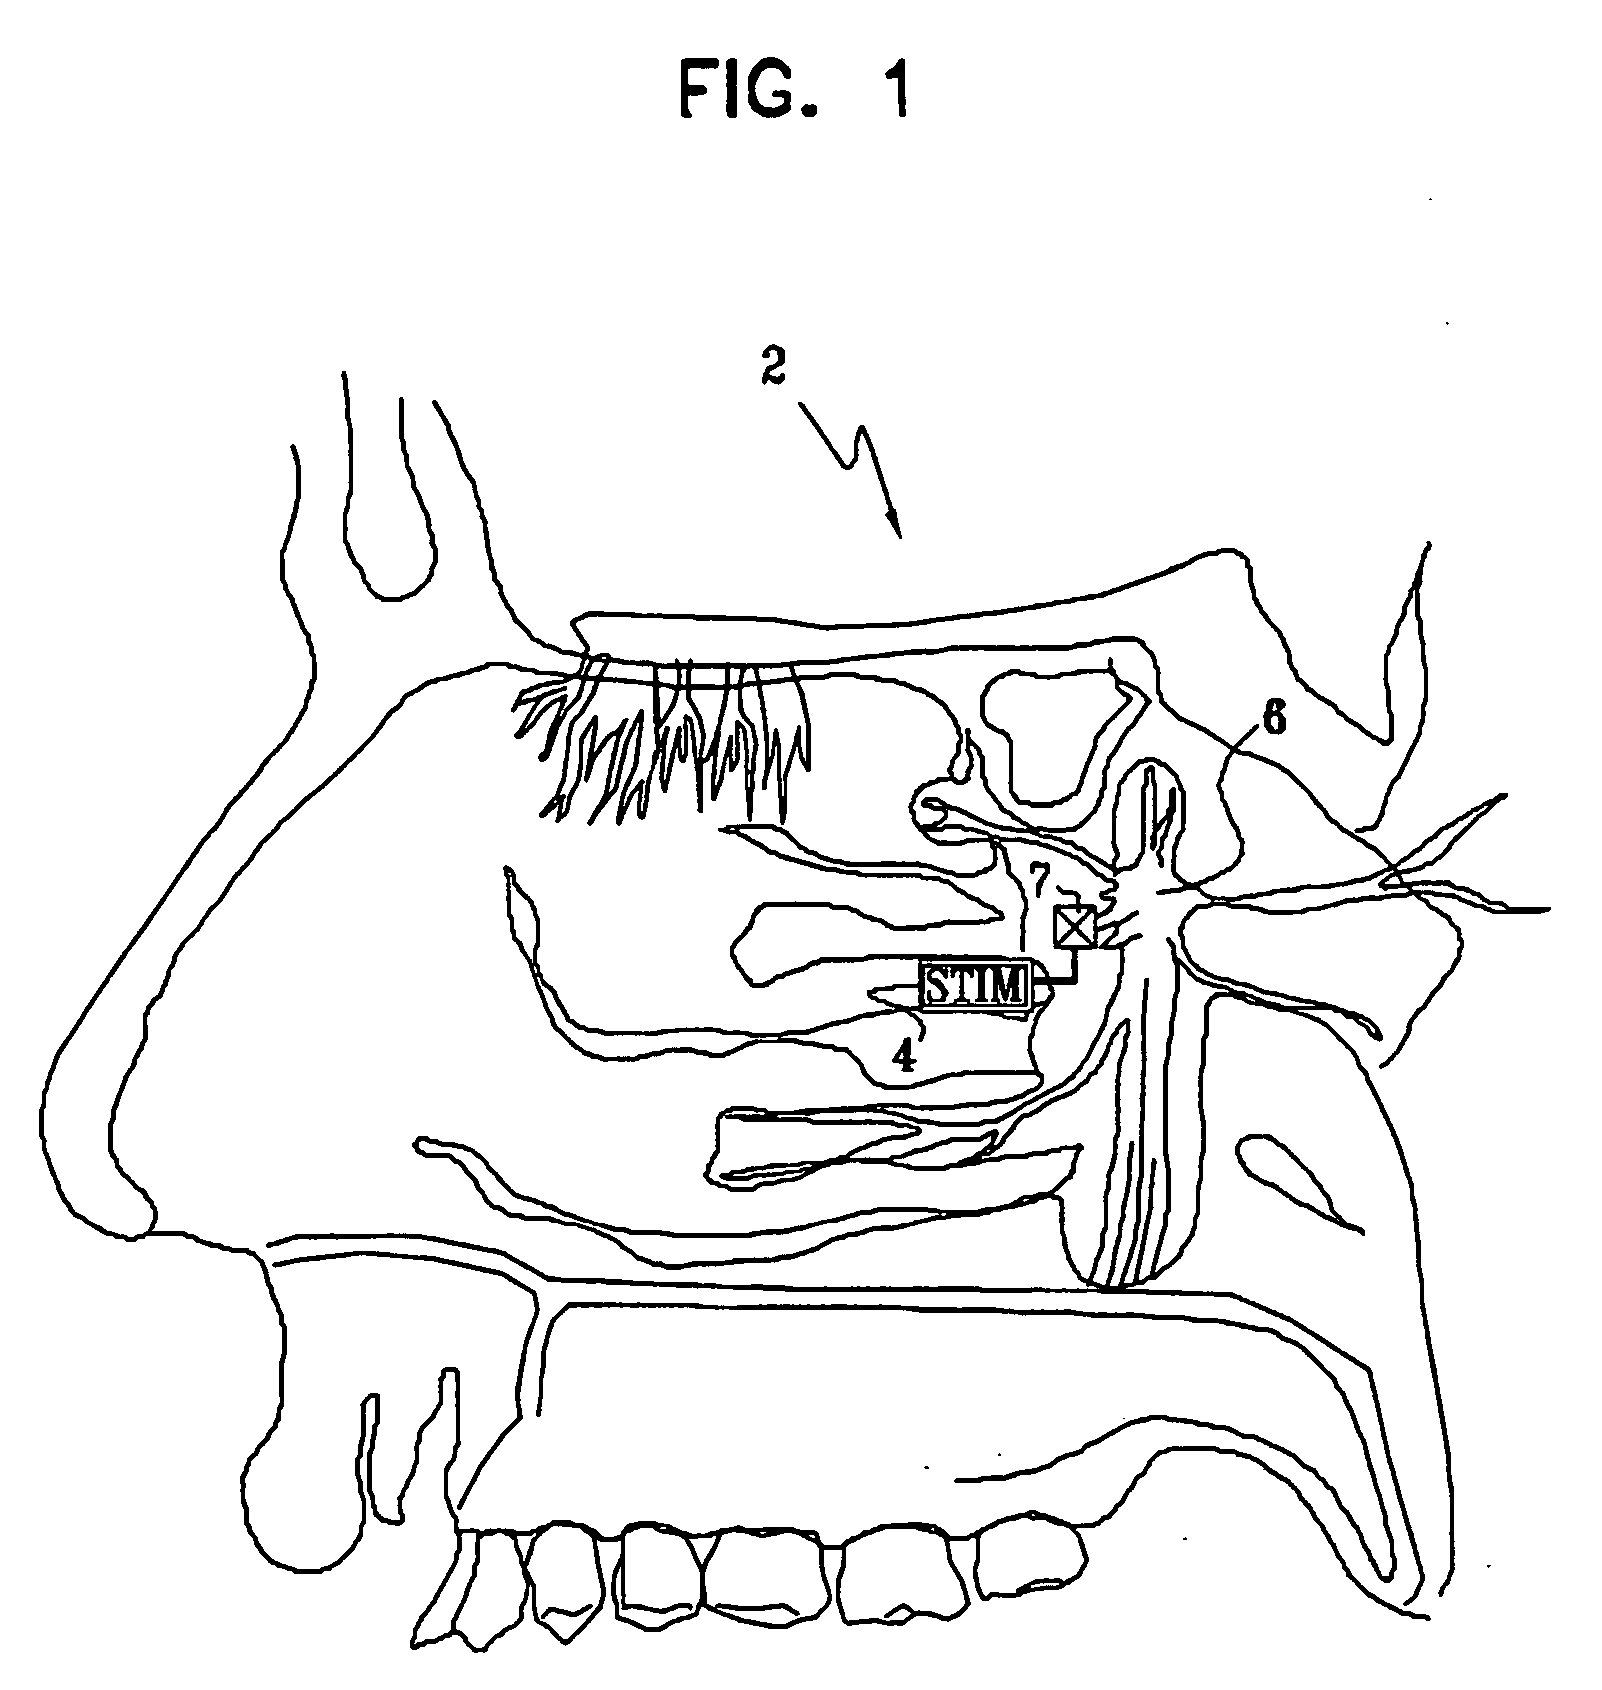 Methods and apparatus for modifying properties of the bbb and cerebral circulation by using the neuroexcitatory and/or neuroinhibitory effects of odorants on nerves in the head